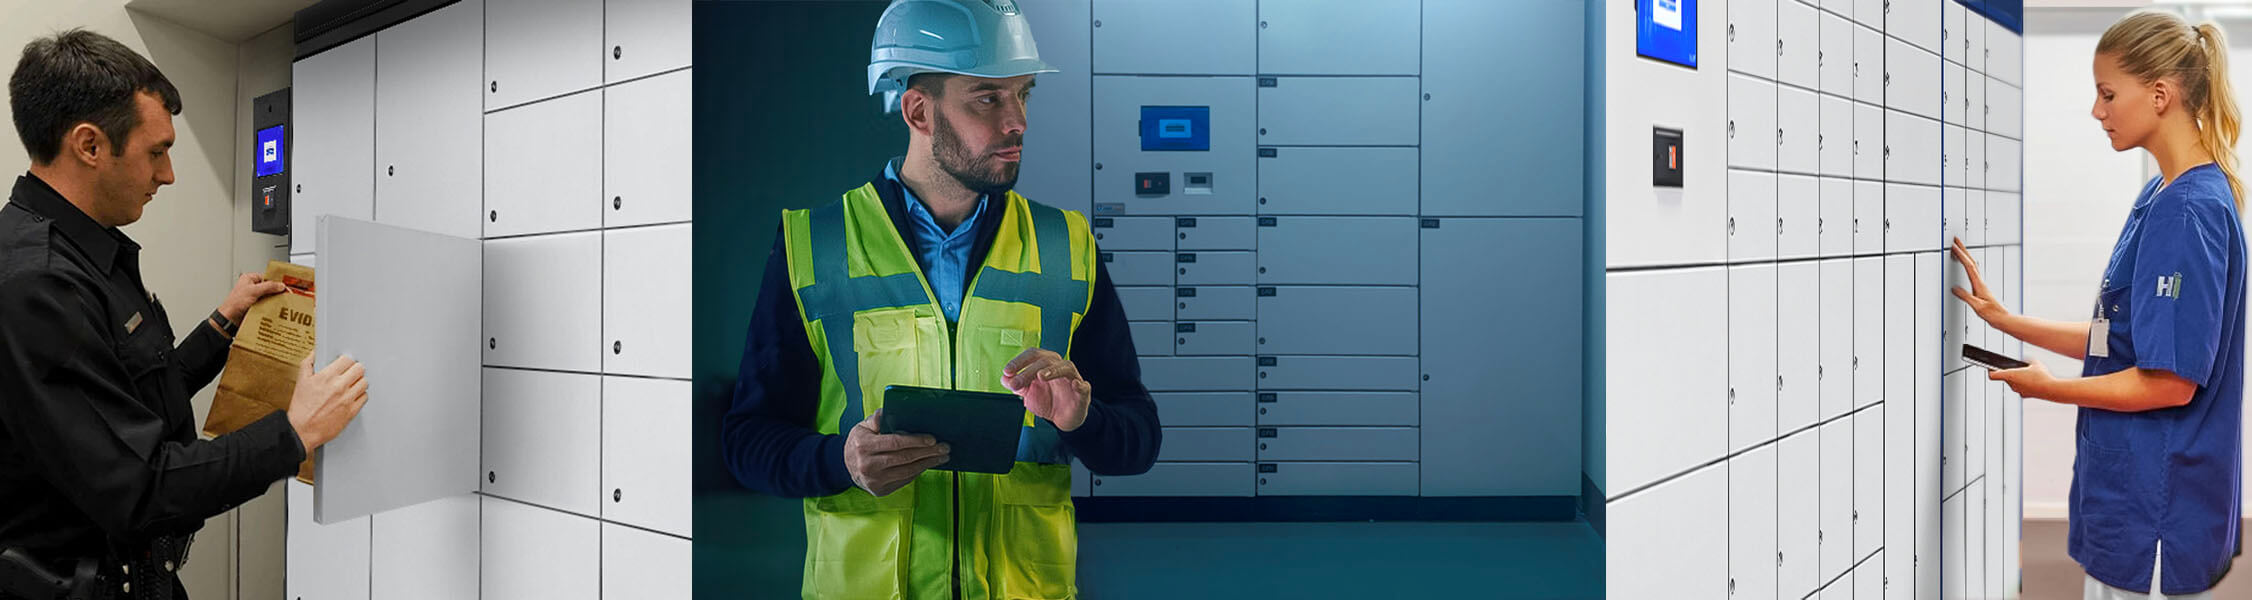 Smart Locker Systems are Used on Different Industries